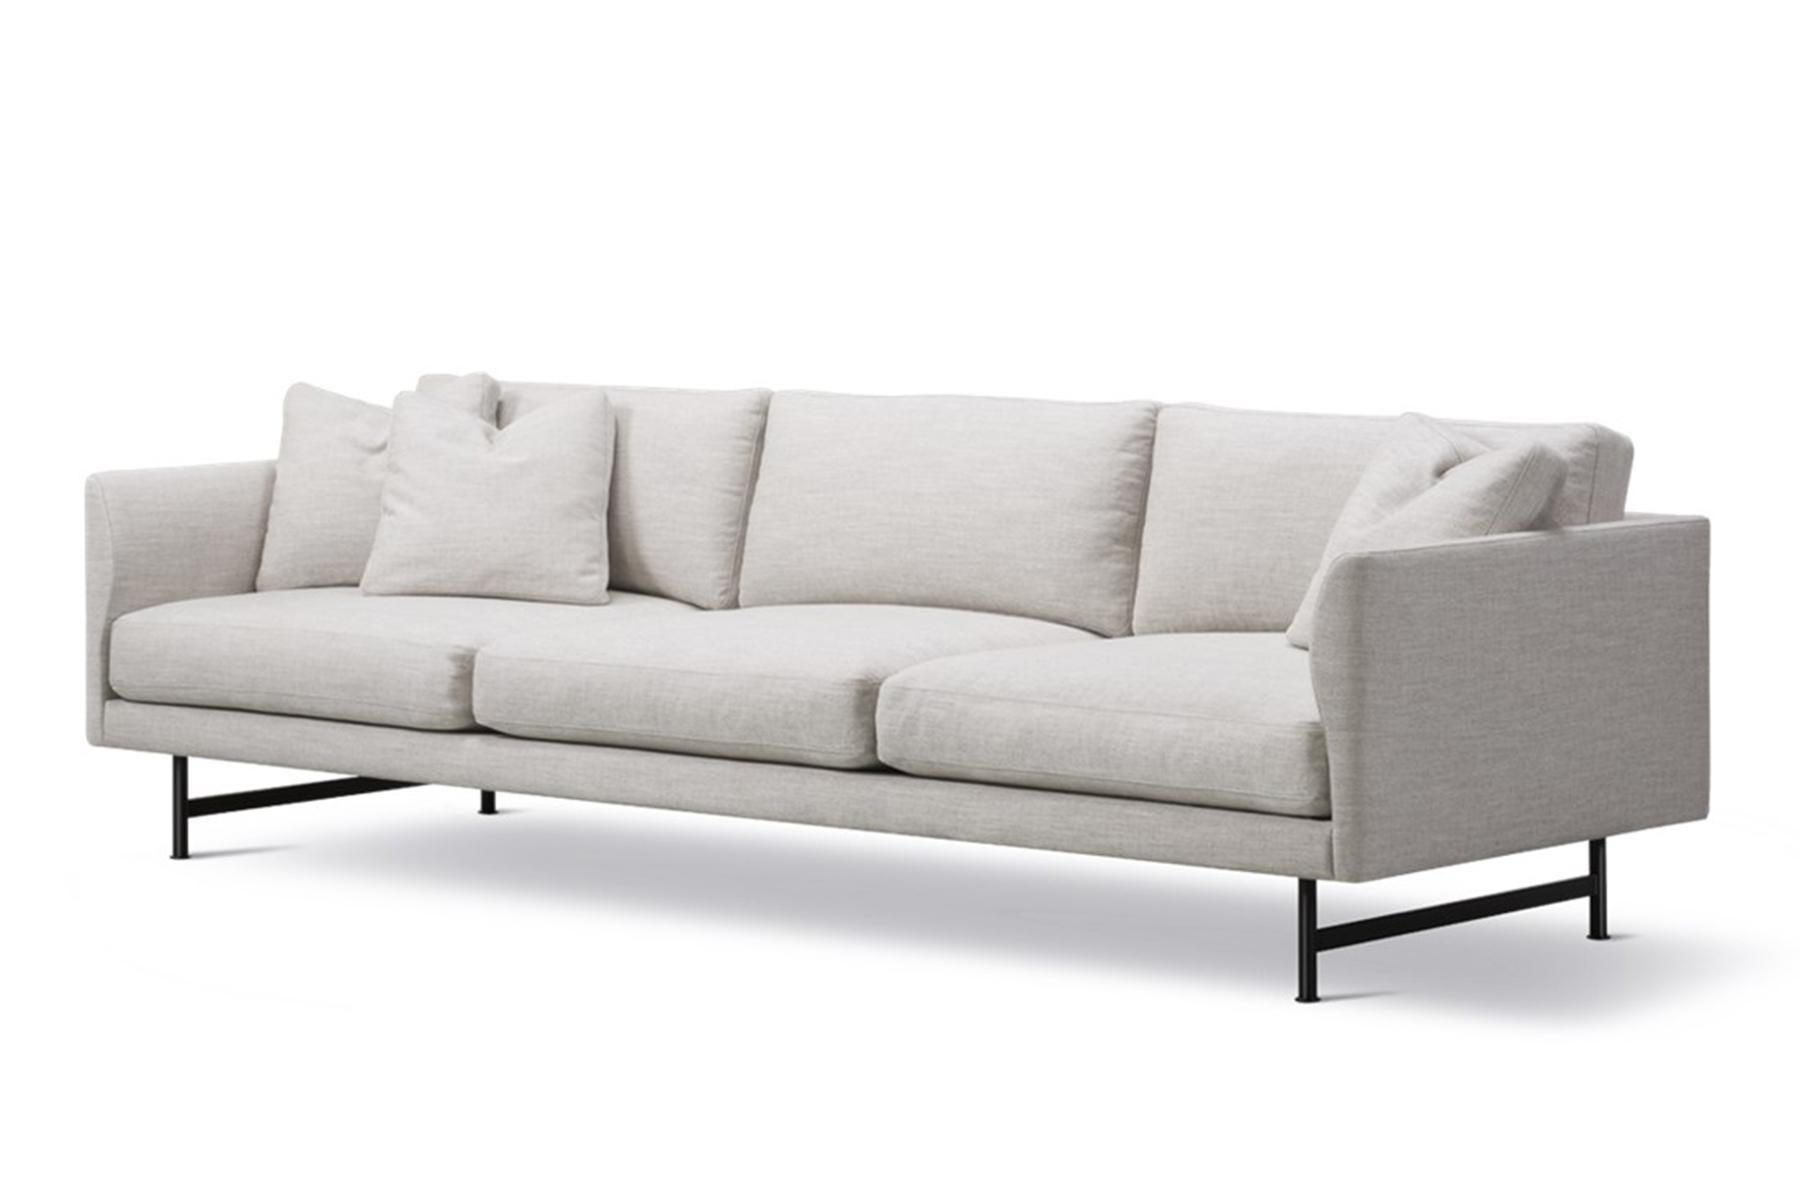 Hugo Passos Calmo sofa 95 – 3-seater – Metal base is simple and serene in this expansive 3-seater Calmo sofa, where straight lines converge with discrete curved details. Comfy cushions complete the picture in this understated expression of elegance.